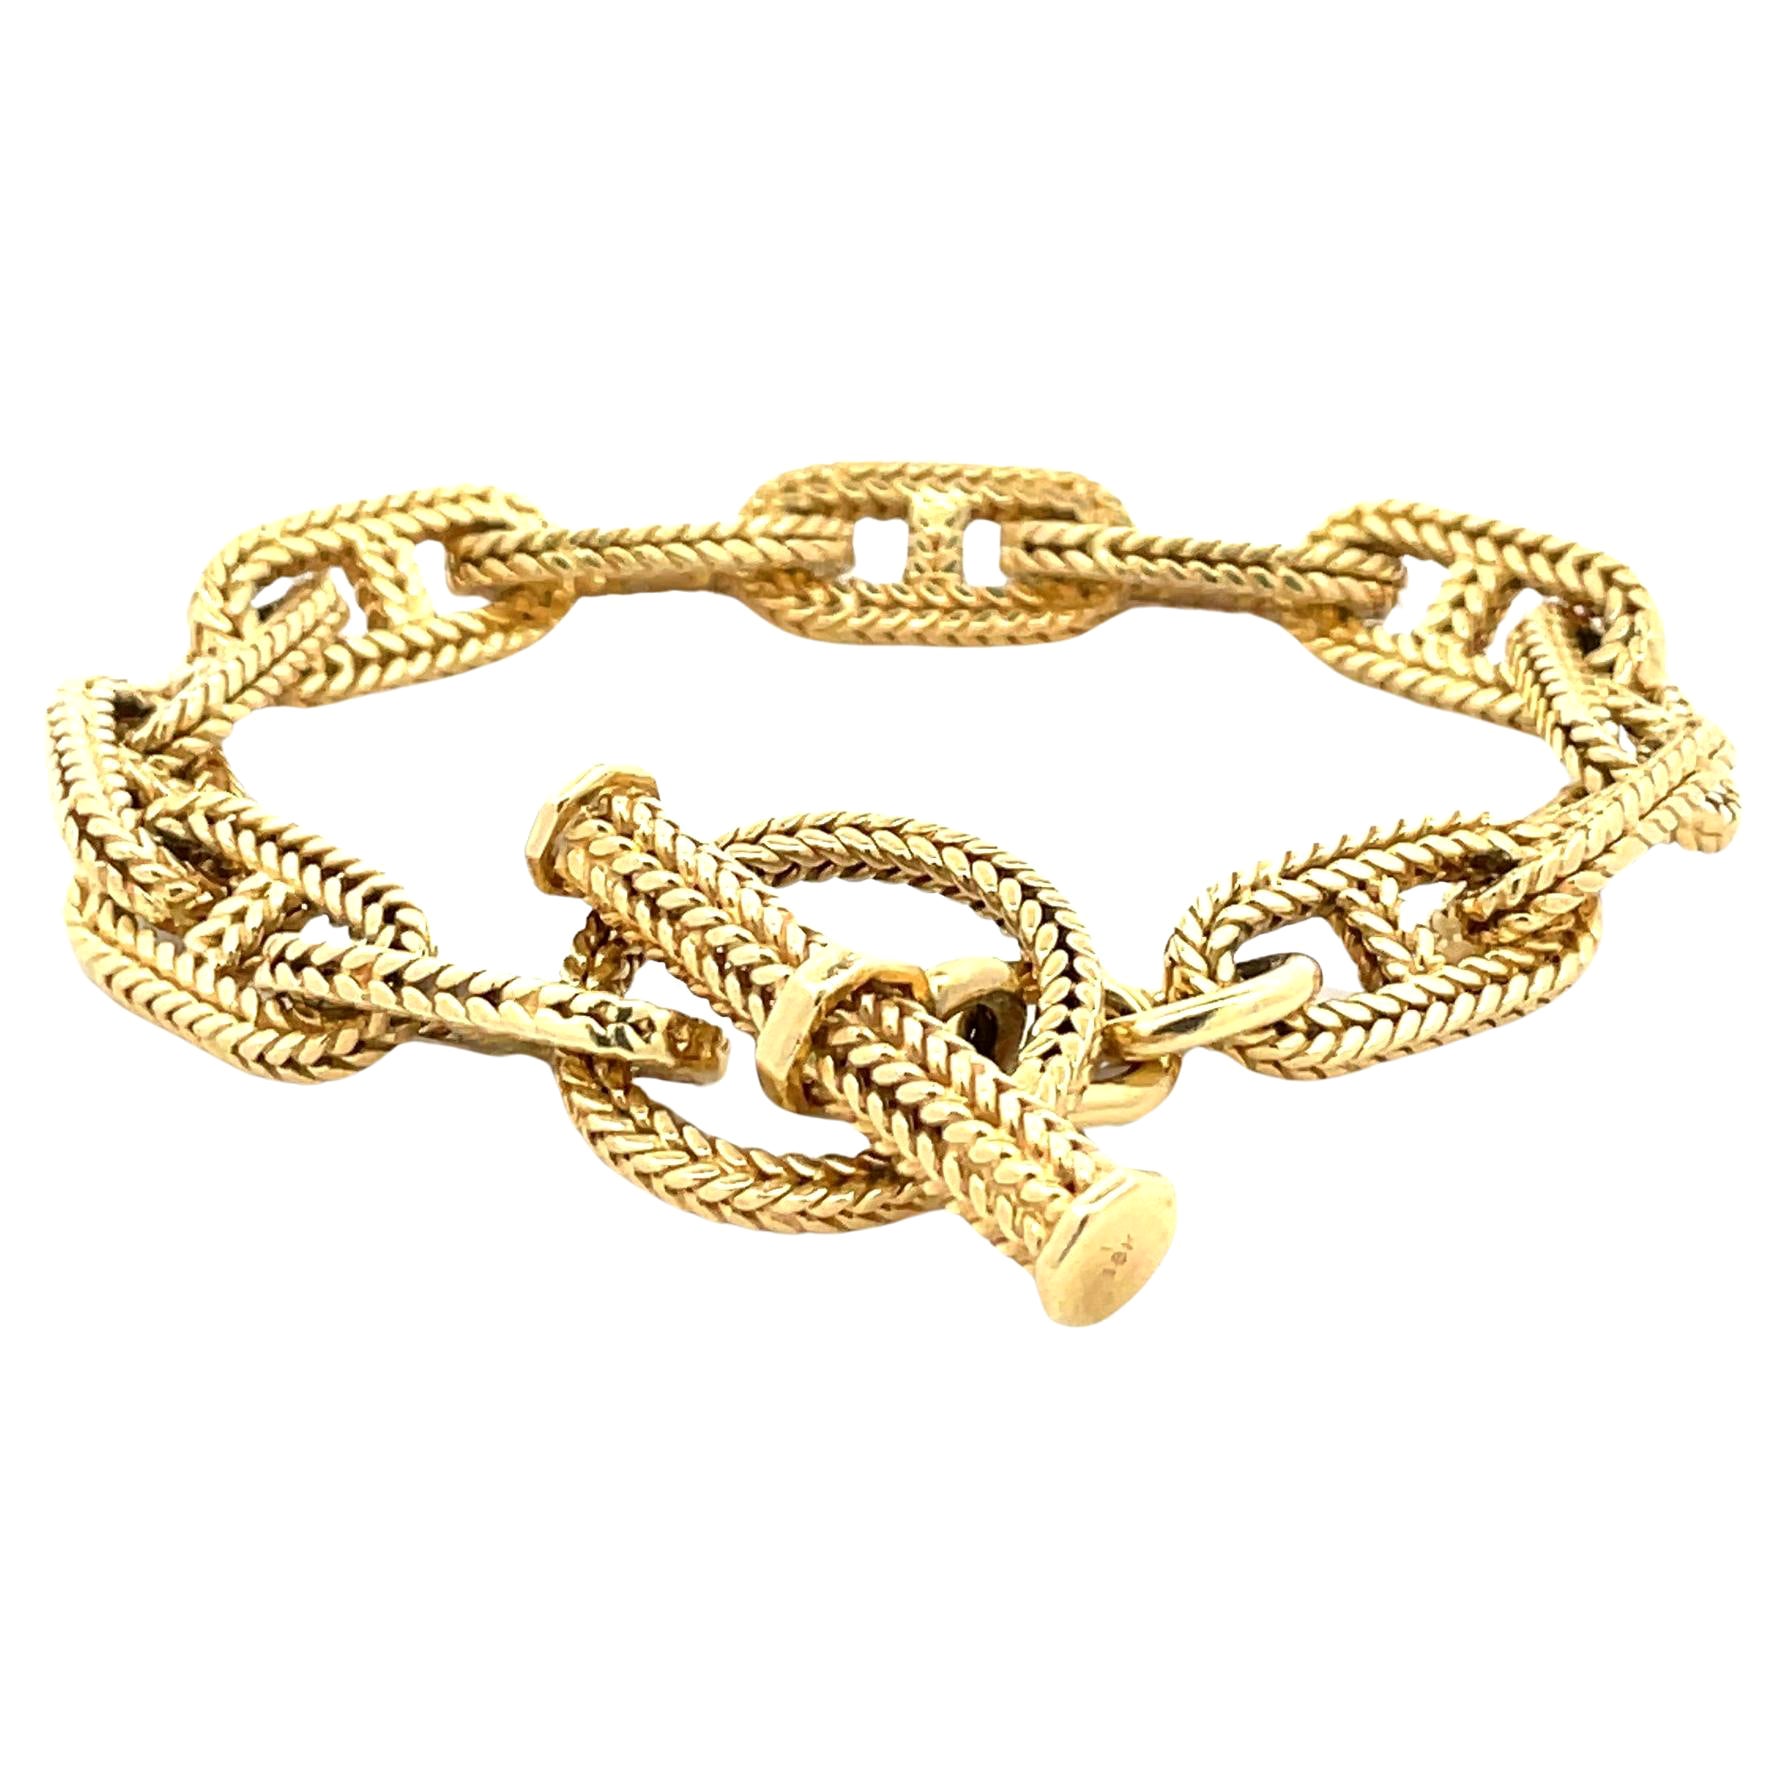 Vintage Style "Chaine d'ancre" Small Link Bracelet in 18 Karat Yellow Gold